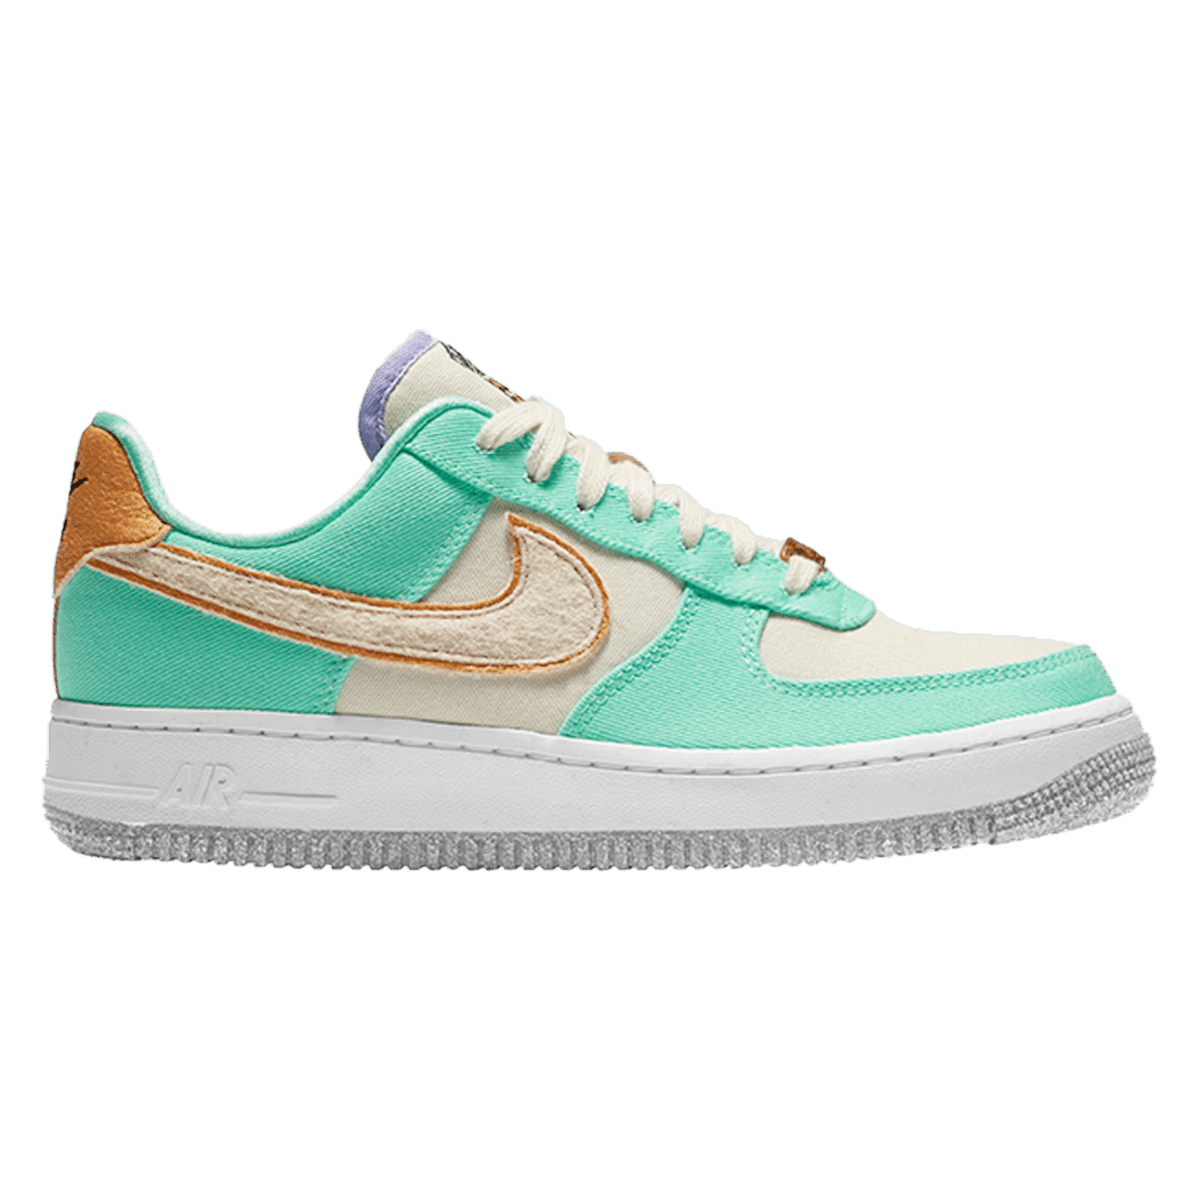 Nike Air Force 1 '07 LX WMNS "Happy Pineapple"